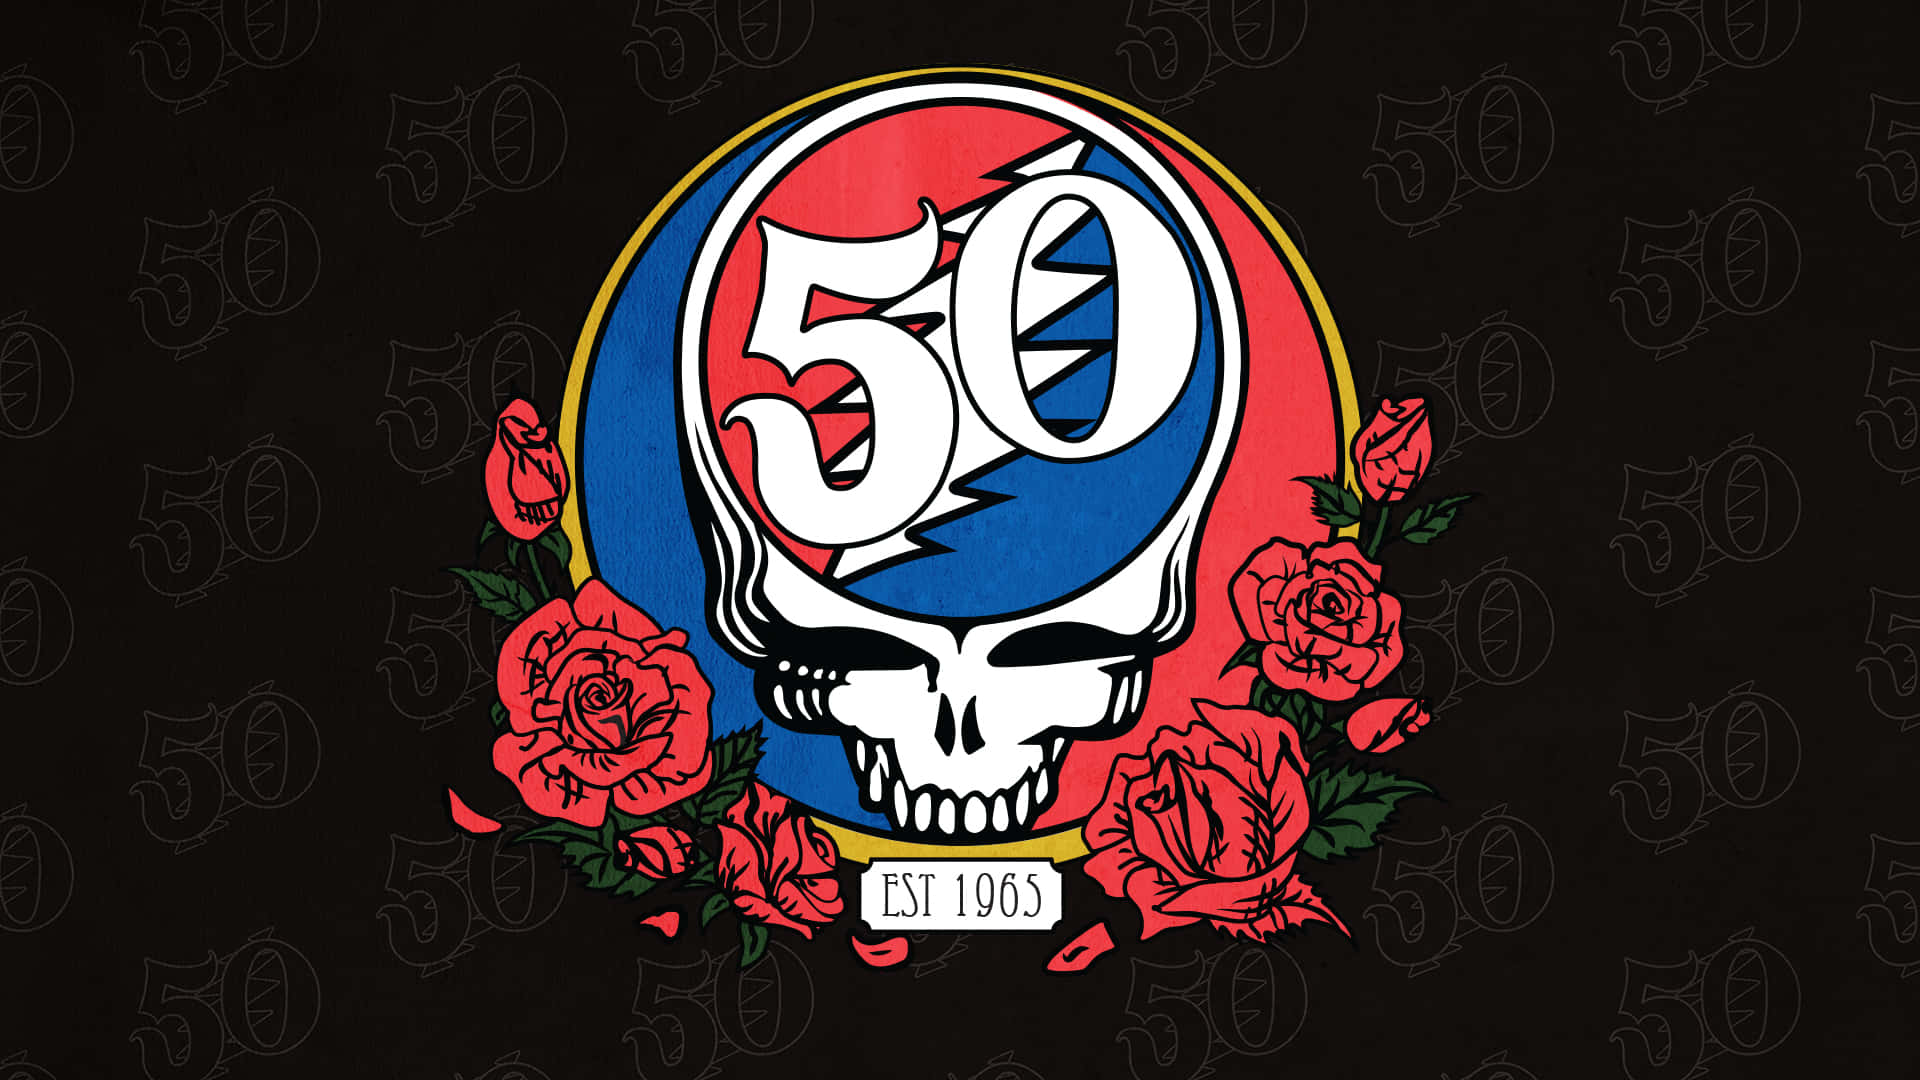 Show everyone your love of The Grateful Dead wherever you go with your Grateful Dead iPhone Wallpaper